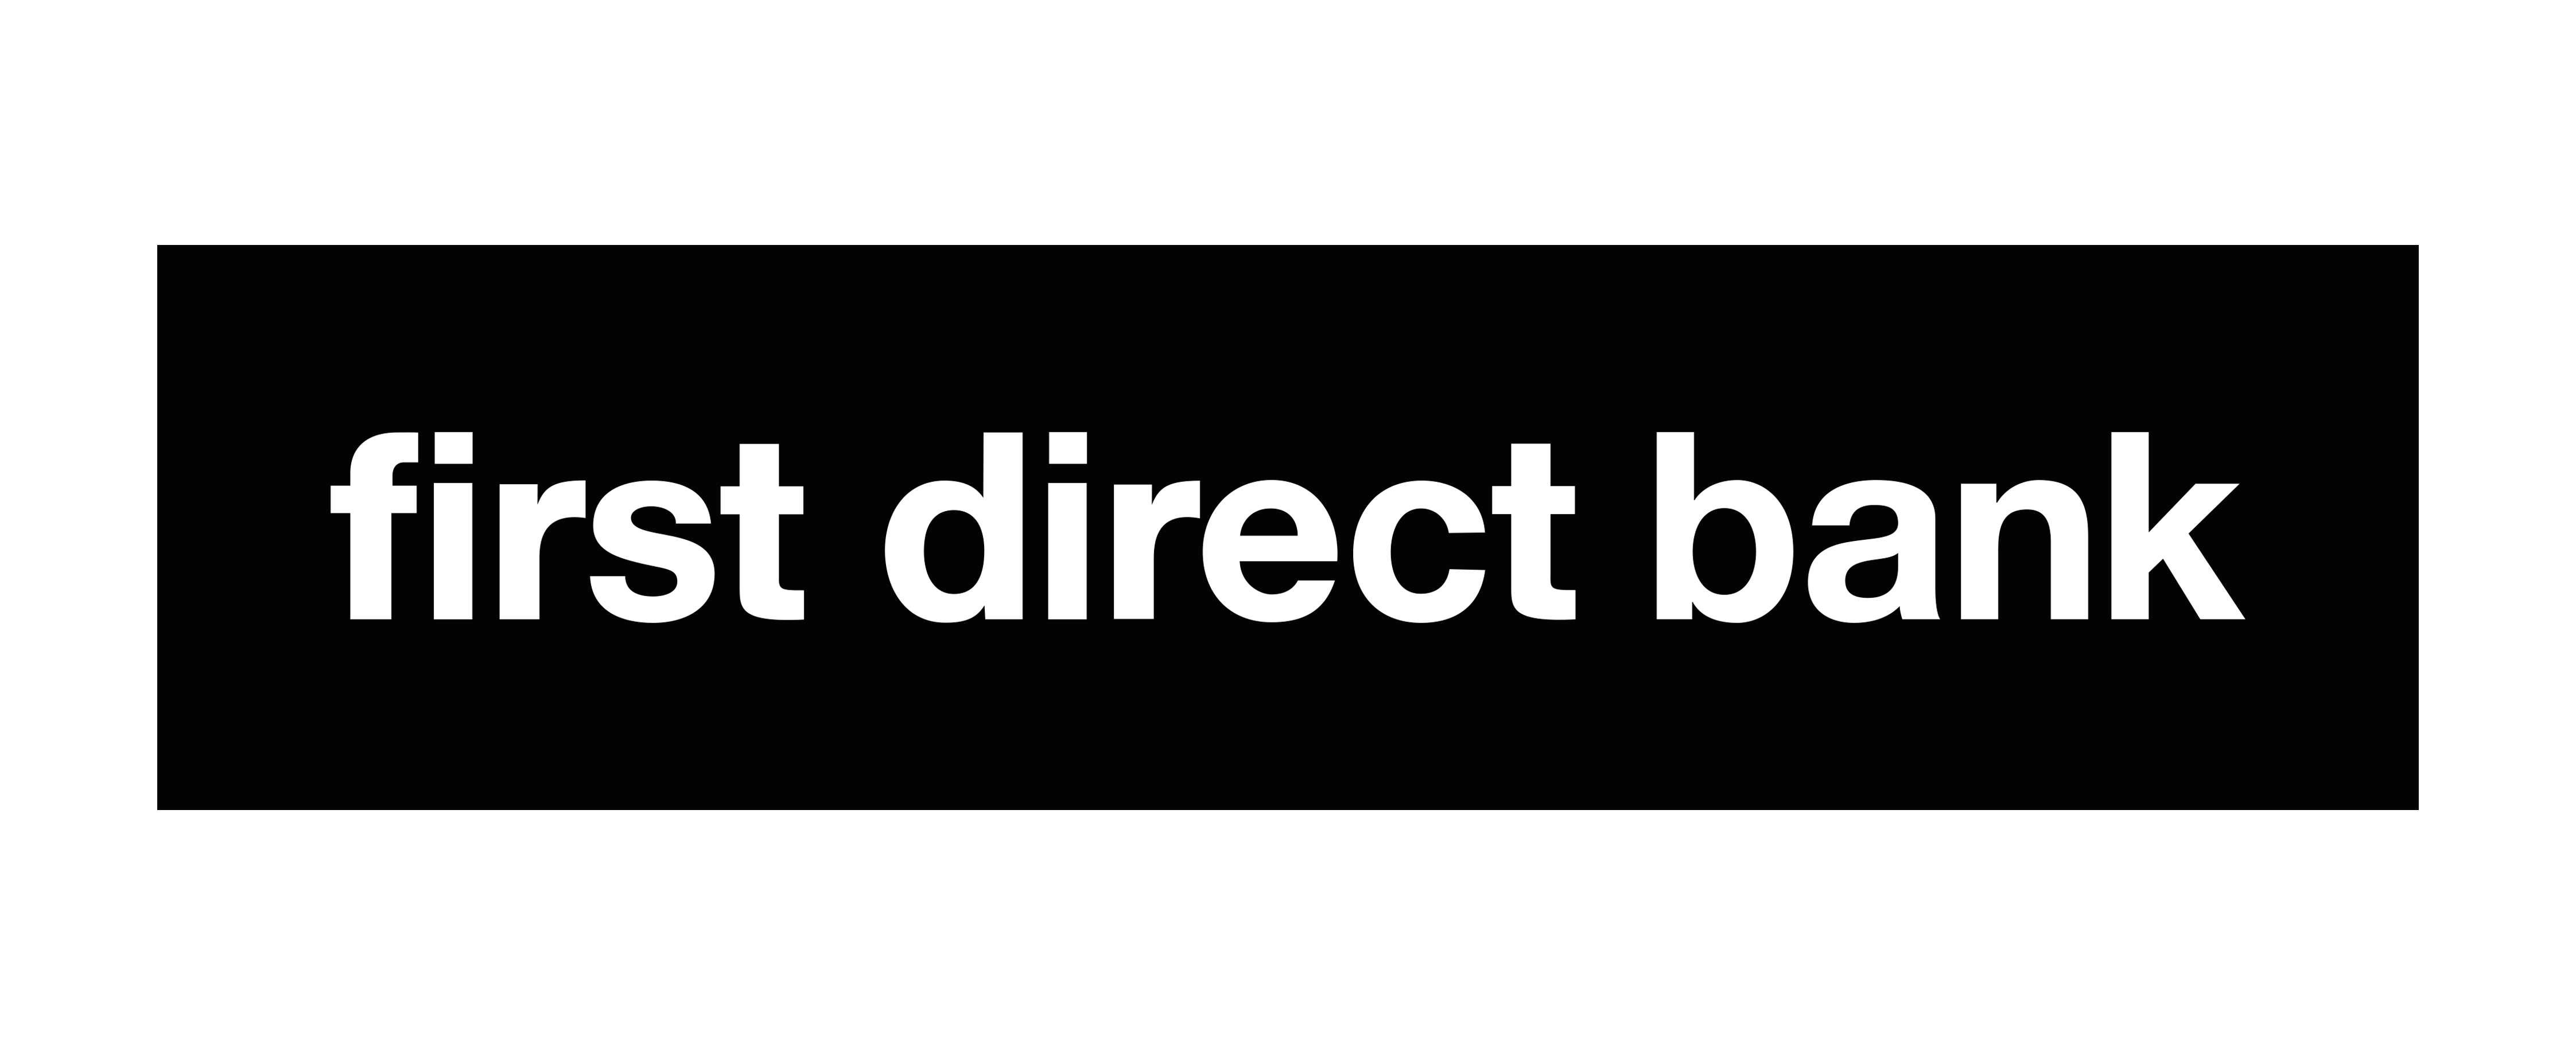 first direct bank logo_primary (1)